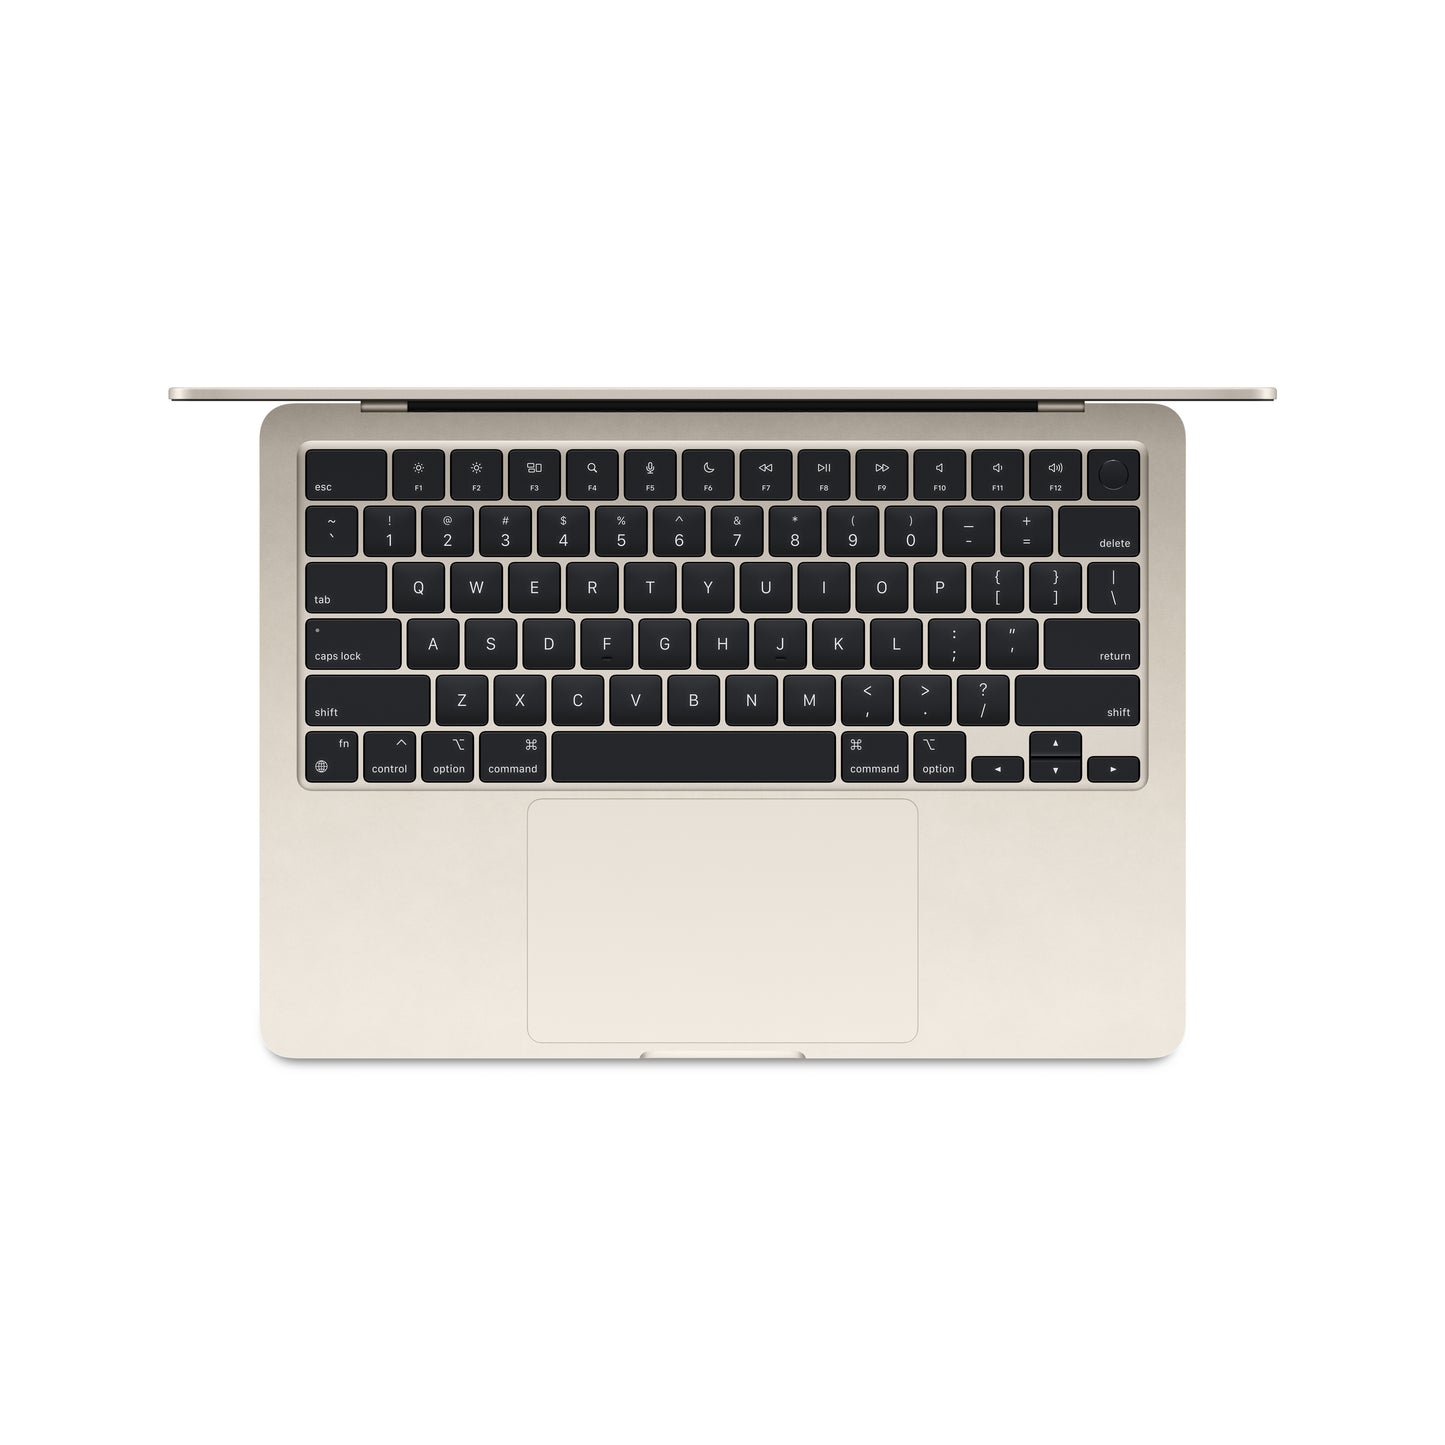 13-inch MacBook Air with Apple M3 and 10-core GPU